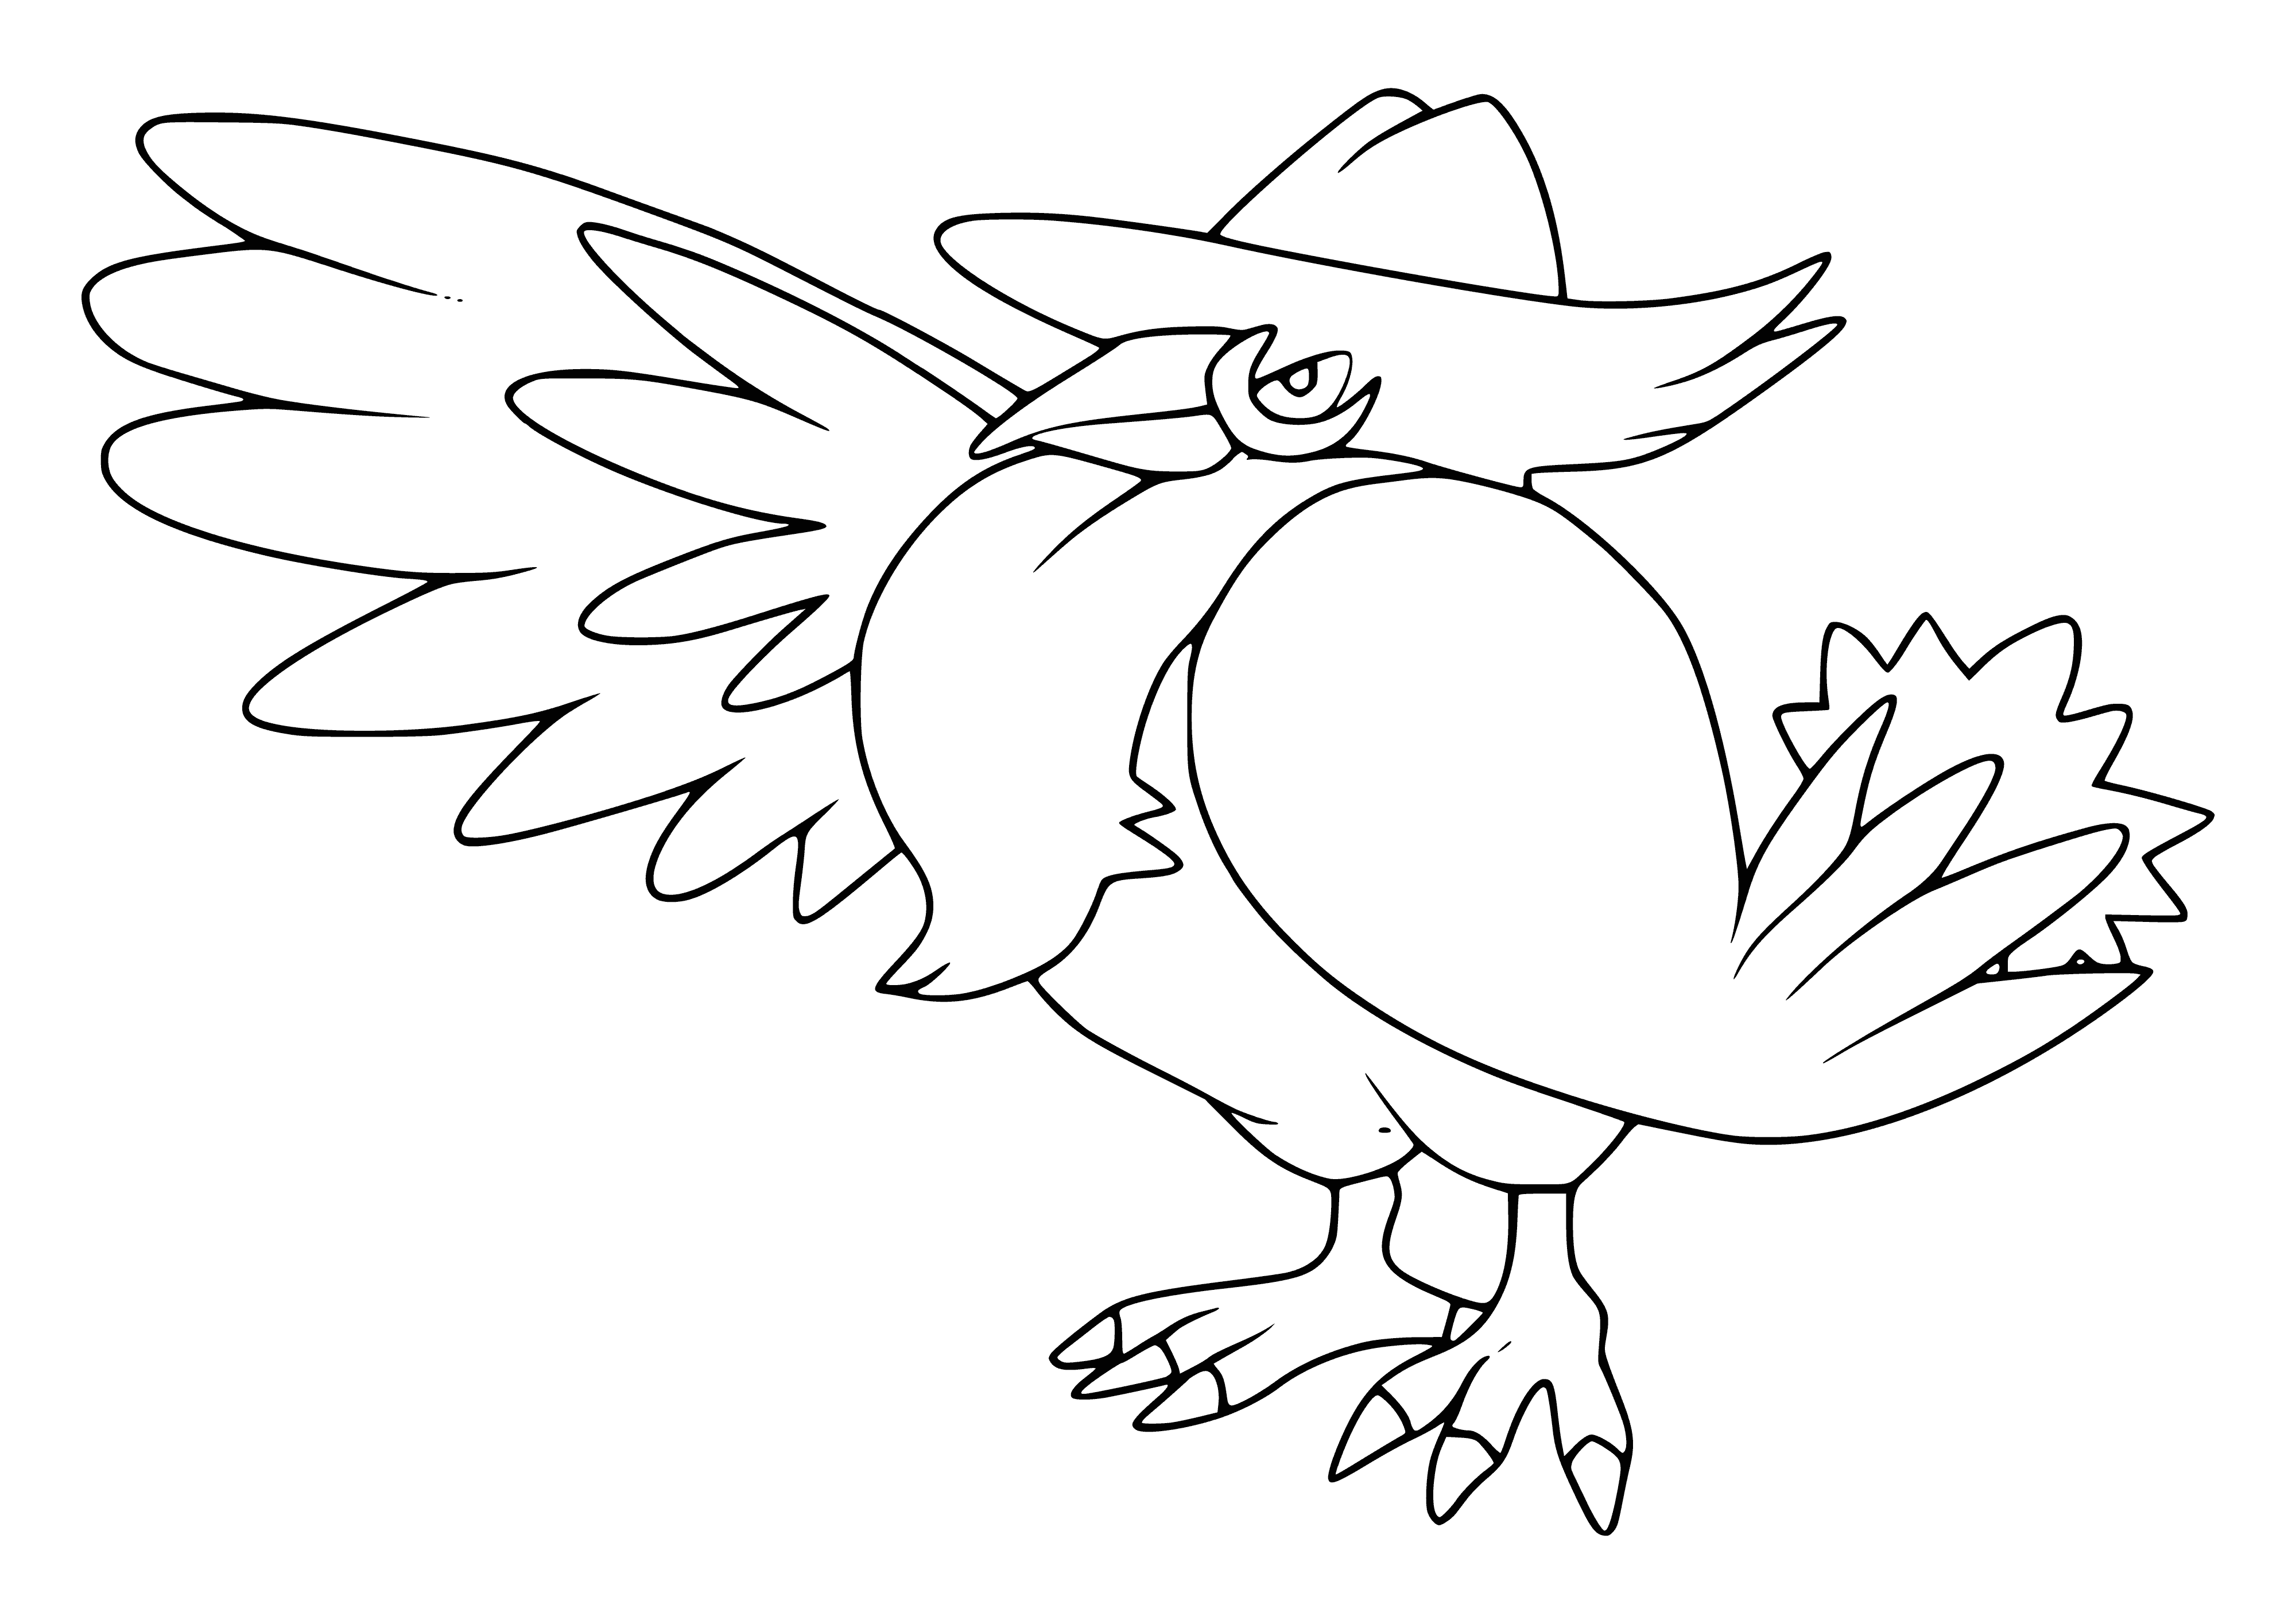 coloring page: Large black bird Pokémon with purple accents, long hooked beak, red eyes, and V-shaped mark on chest. Small wings and long black tail feathers.